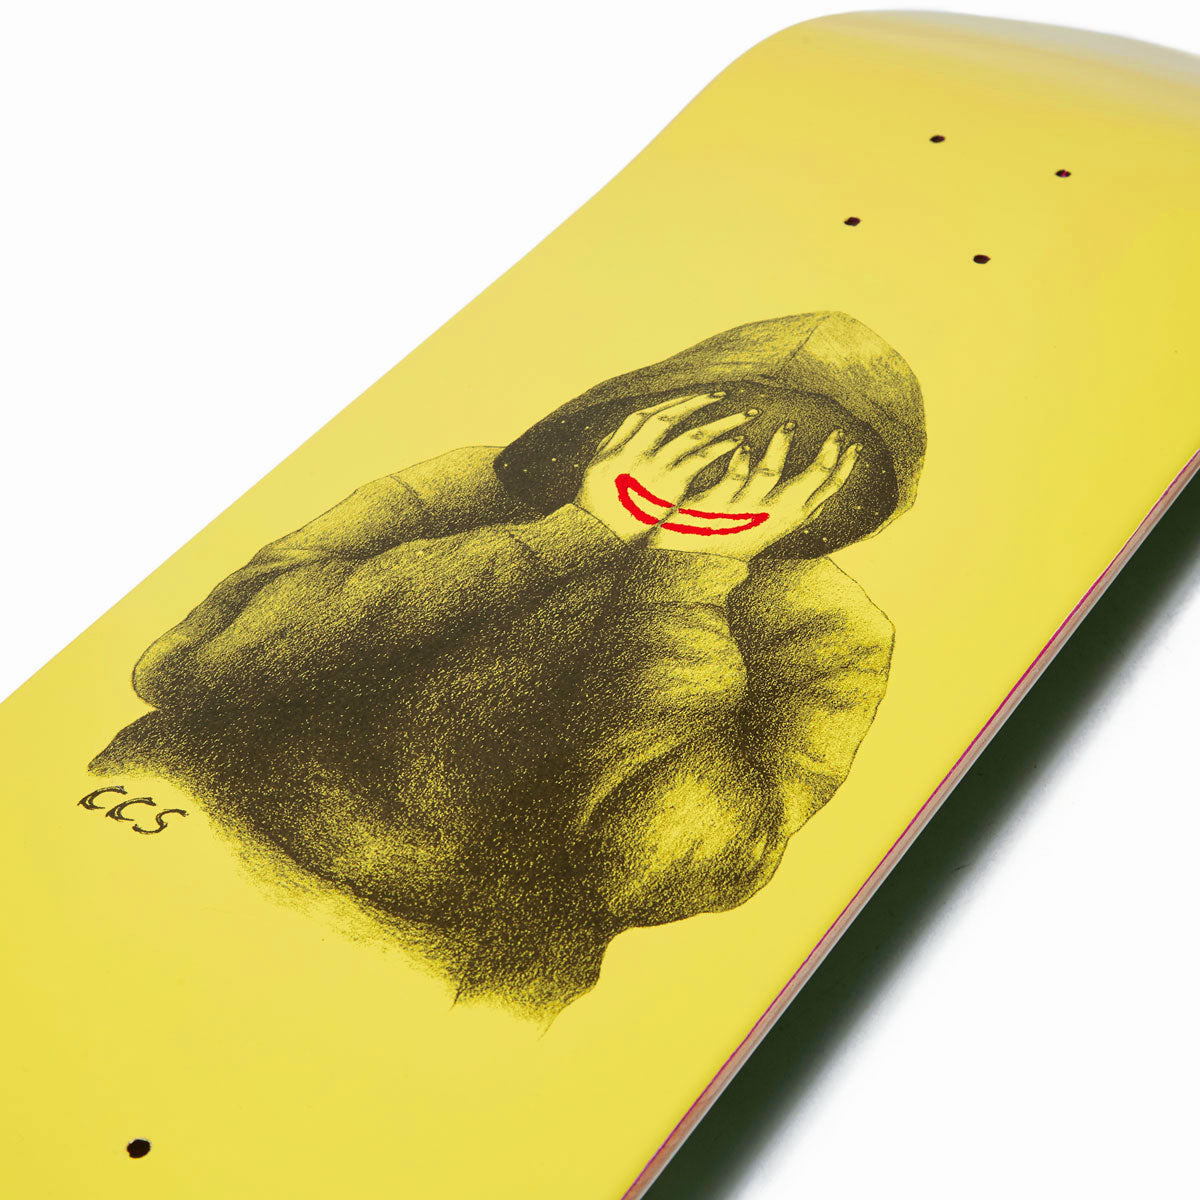 CCS Smile on The Surface Skateboard Complete - Yellow image 3